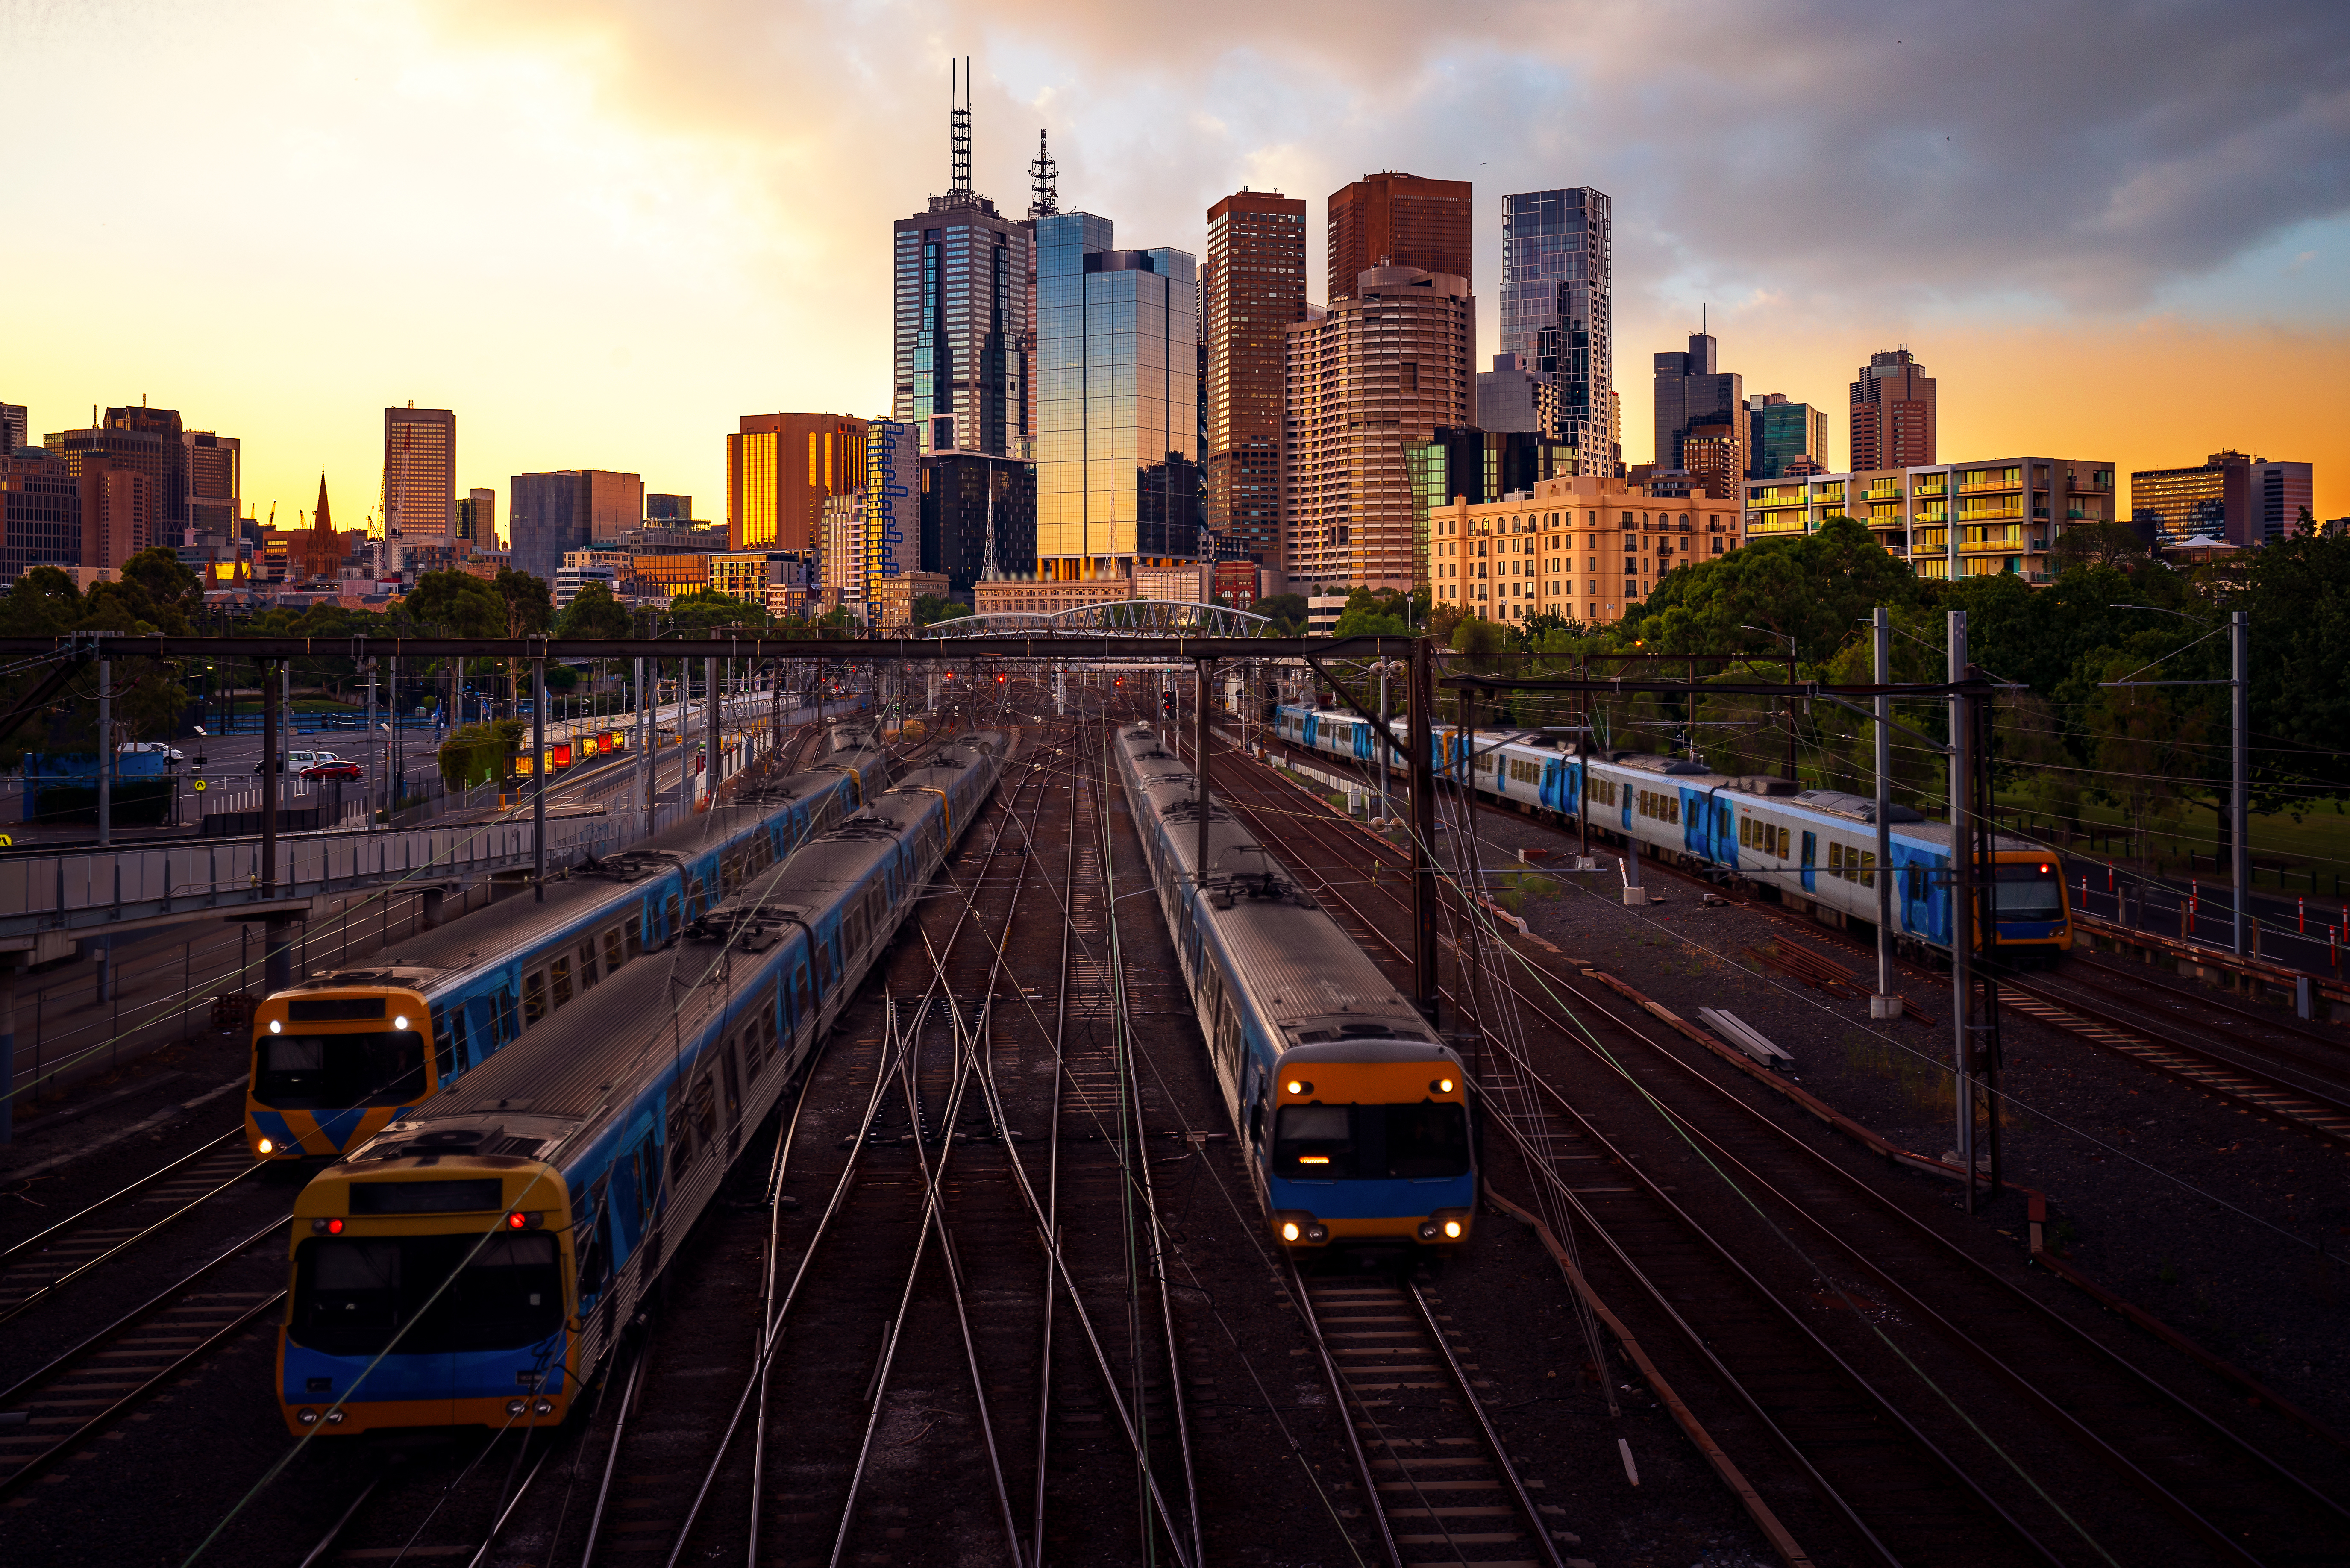 Rail yards with city background at sunset